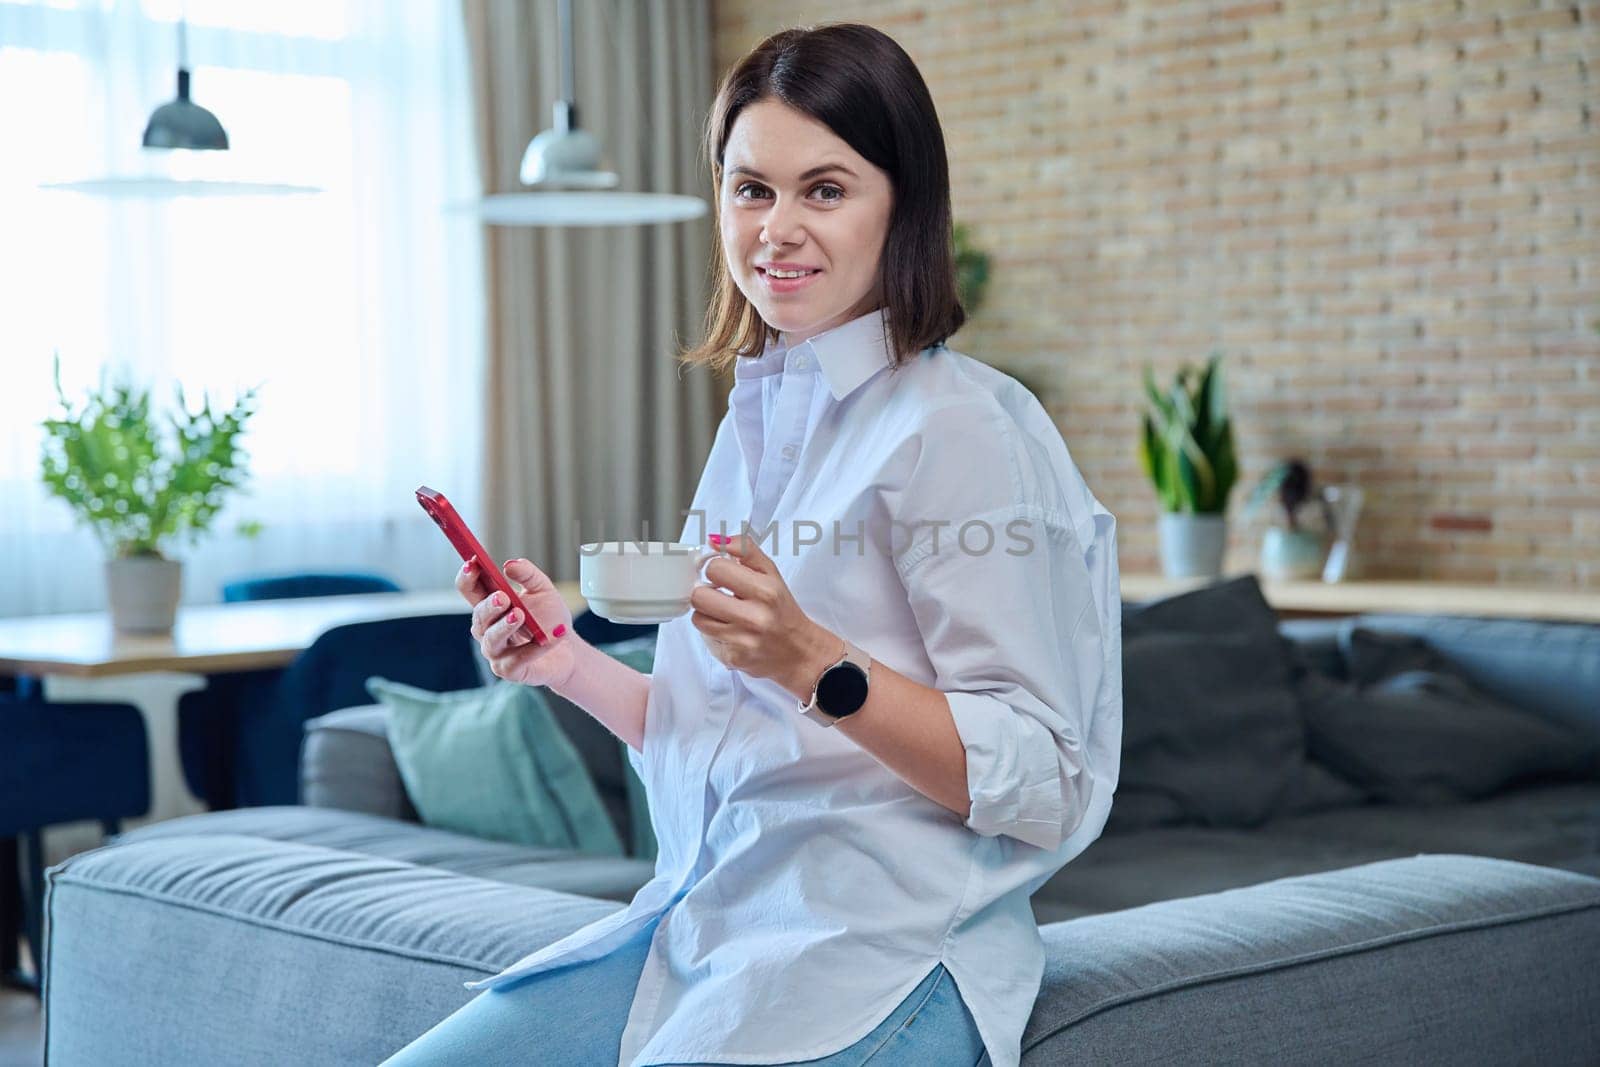 Young fashionable beautiful woman at home on couch in living room using smartphone, with cup of coffee in hands. Internet online technology, mobile applications for study leisure life work shopping